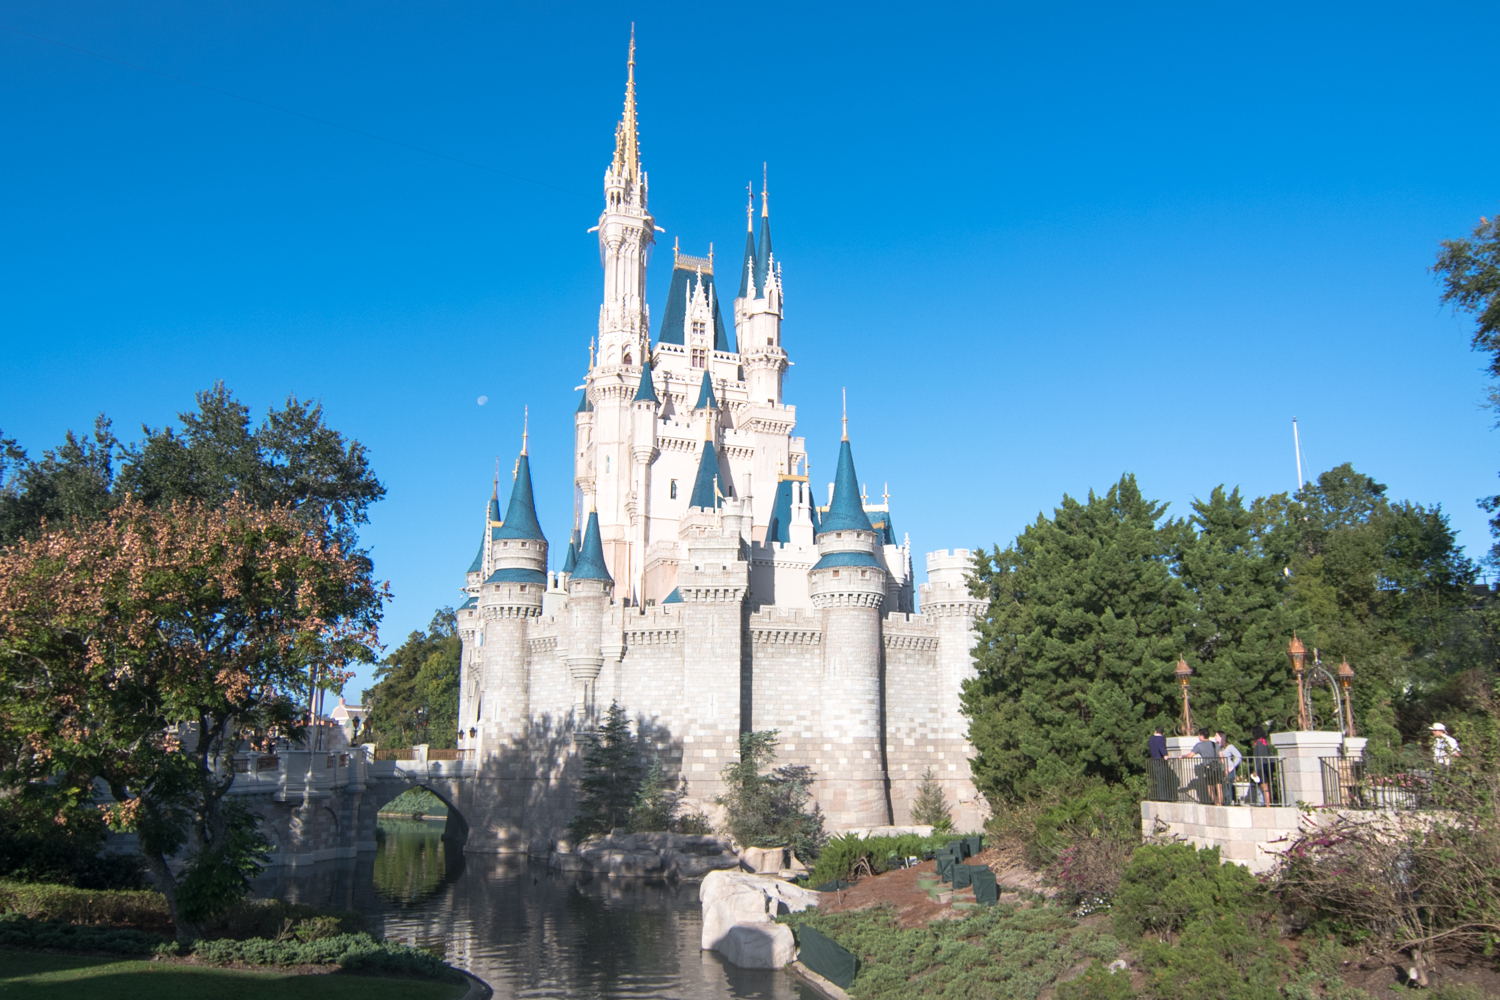 Just in time for your next trip, 10 ways to stay healthy on a Disney World Vacation #disneyworld #travel